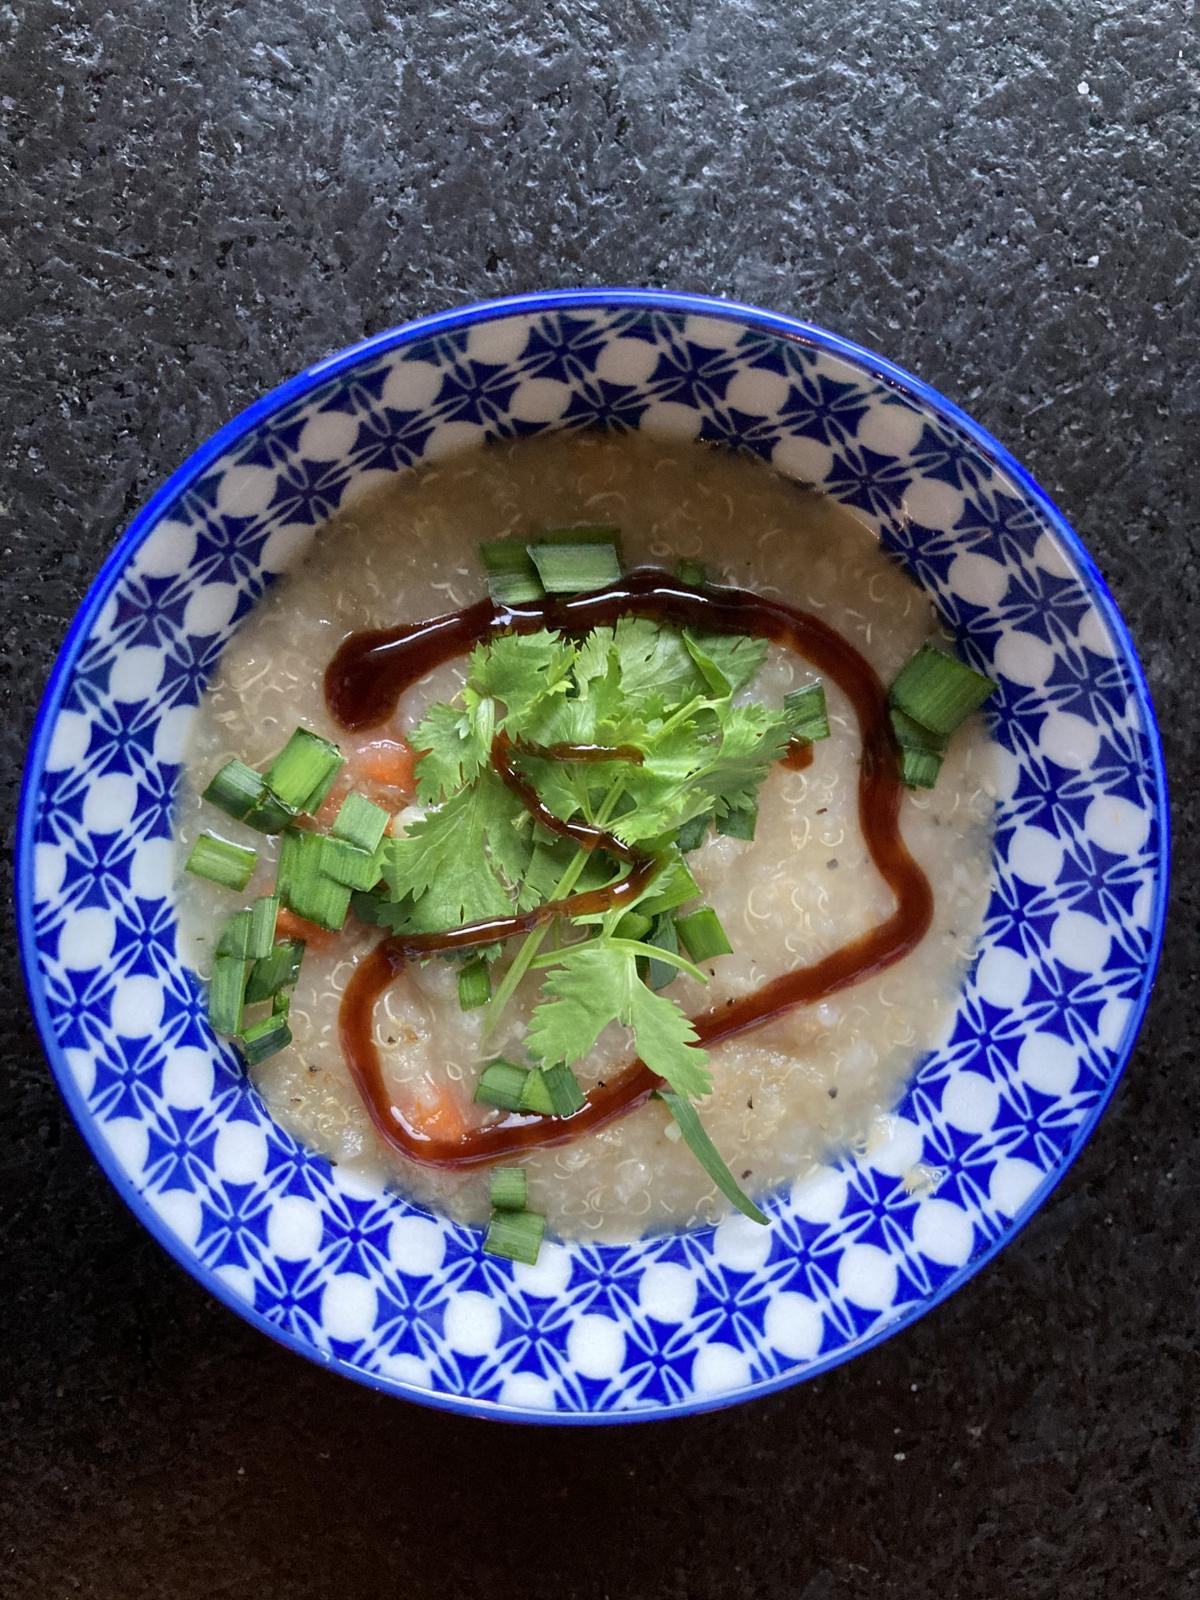 Ma knows best: Quinoa is a delicious, nutritious addition to congee. (Ari LeVaux)